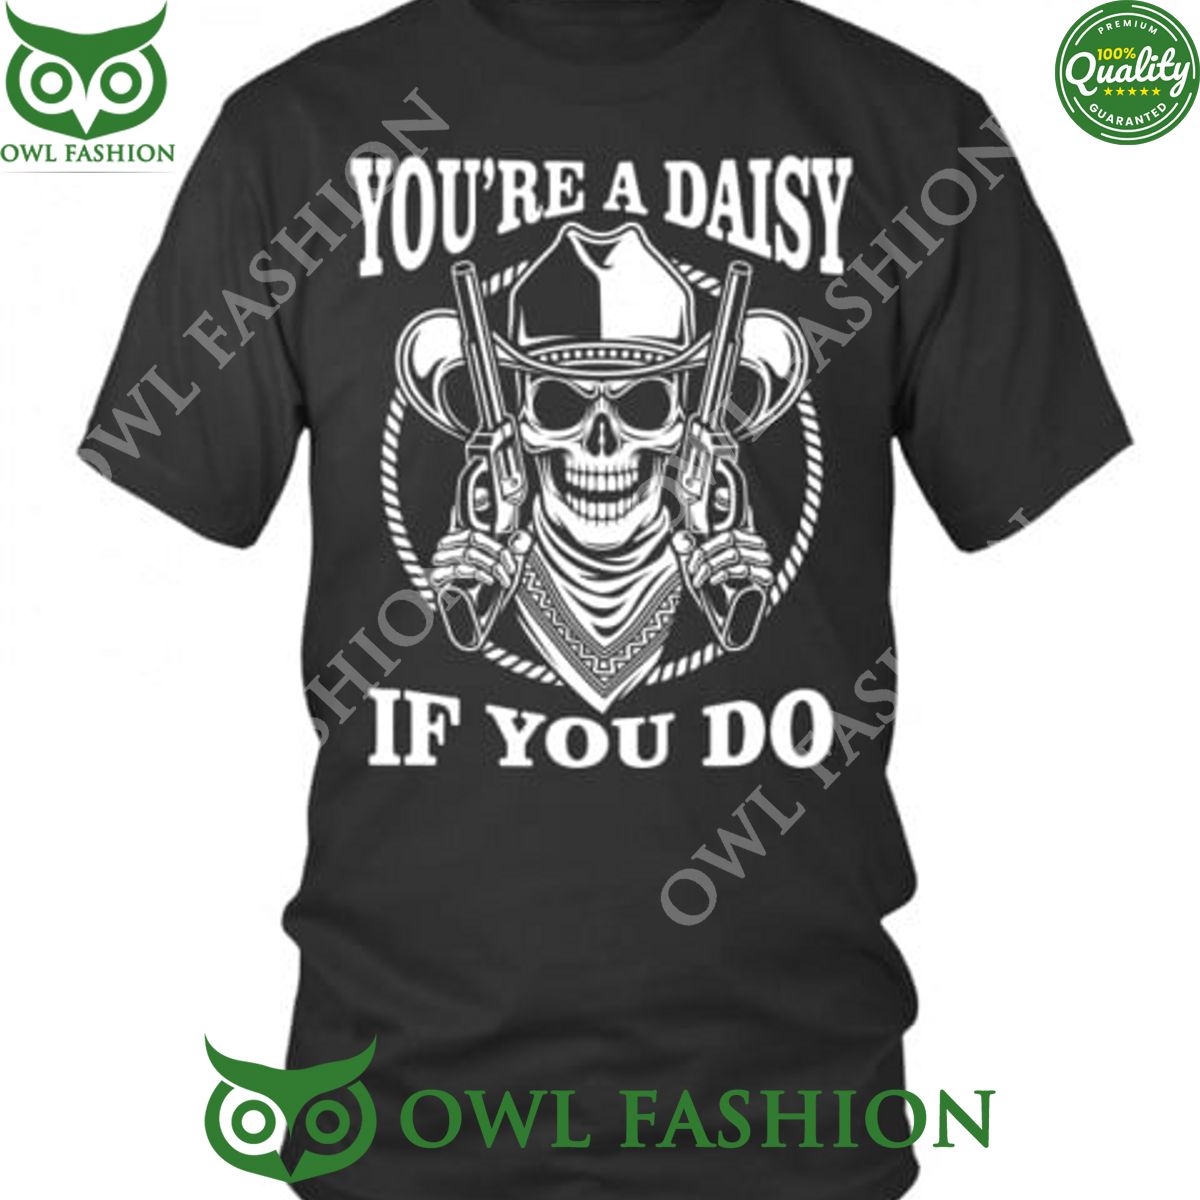 Tombston 1993 You are a daisy if you do Cowboys 2d t shirt